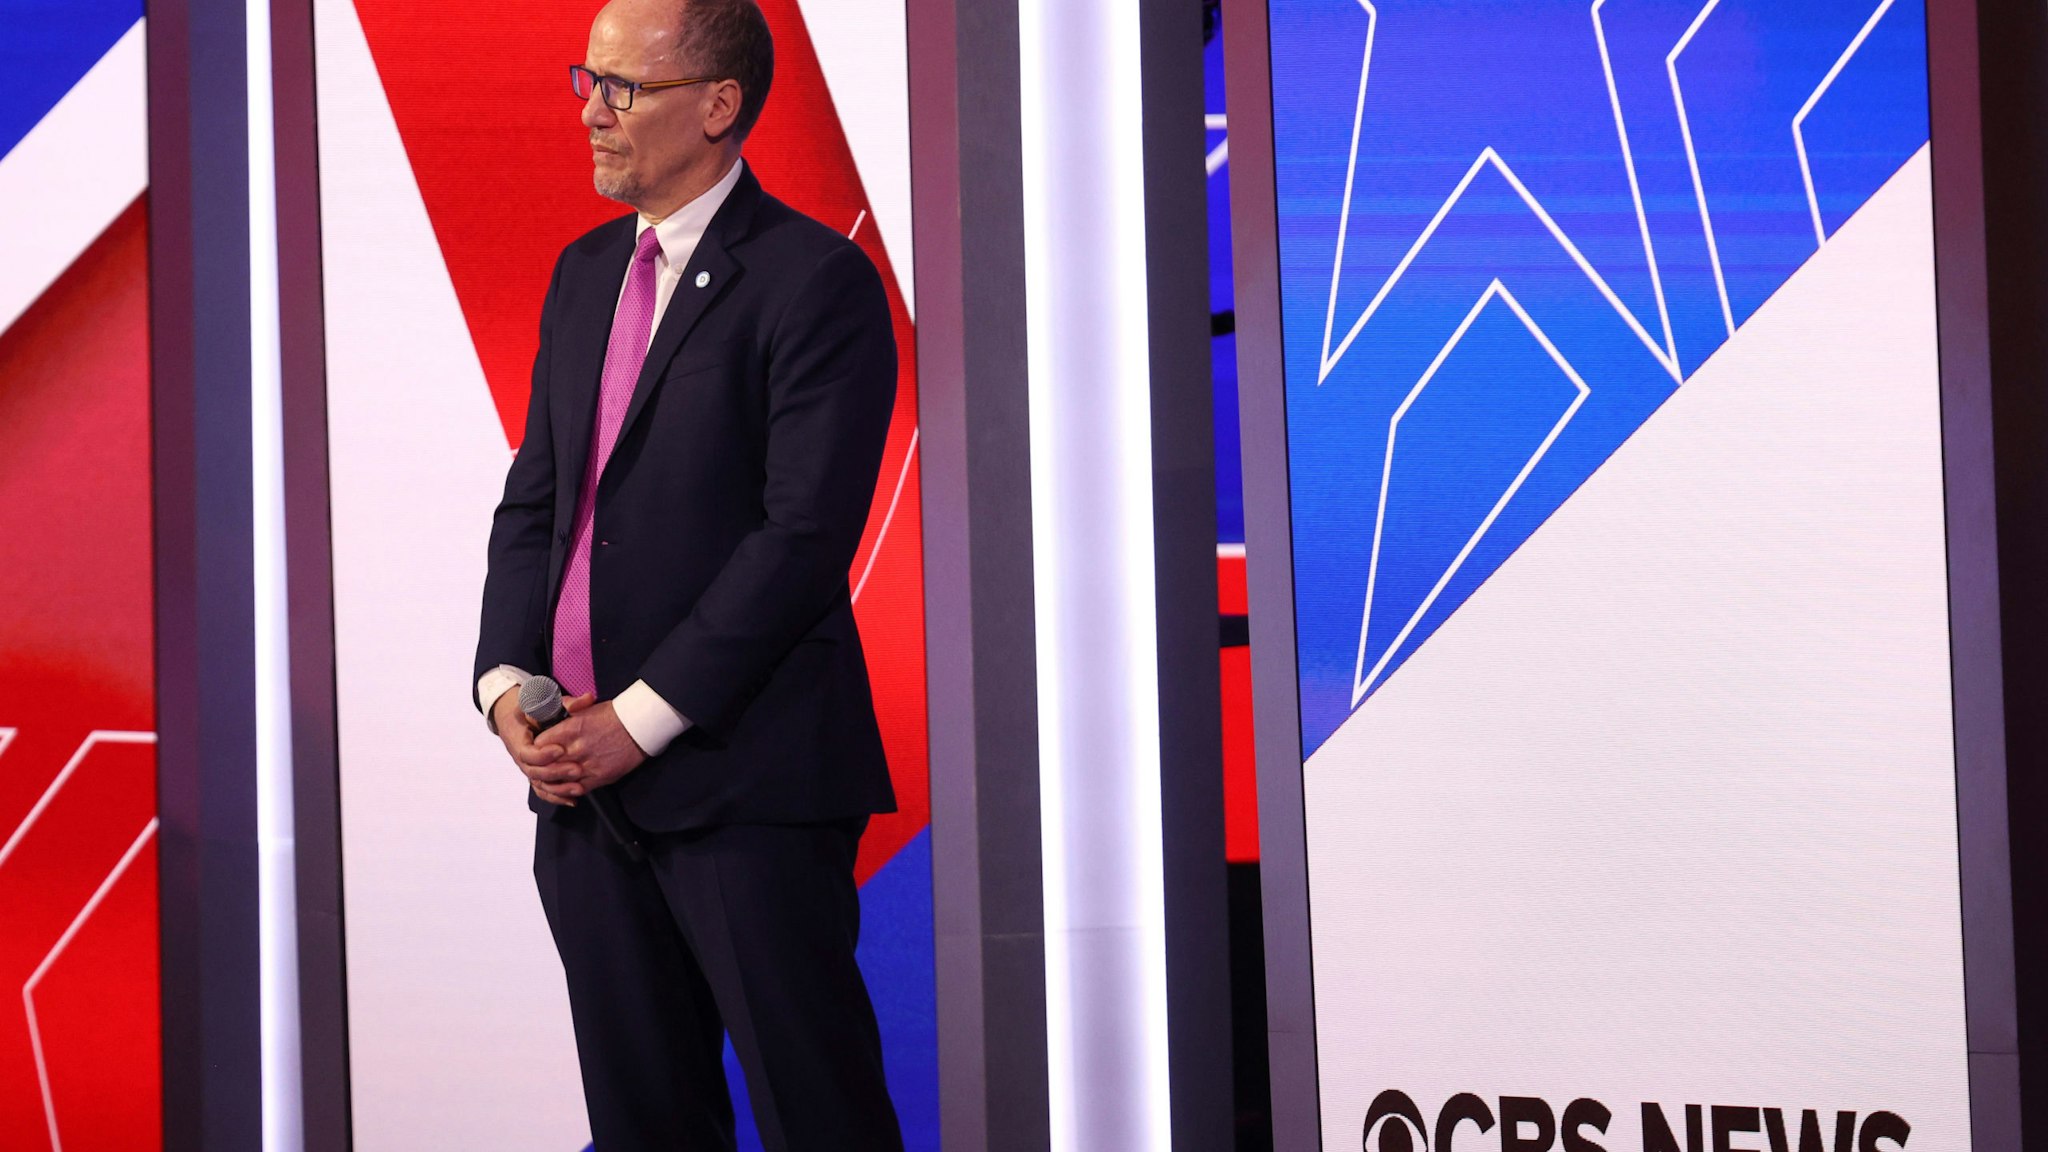 CHARLESTON, SOUTH CAROLINA - FEBRUARY 25: DNC chair Tom Perez stands on stage before the Democratic presidential primary debate at the Charleston Gaillard Center on February 25, 2020 in Charleston, South Carolina. Seven candidates qualified for the debate, hosted by CBS News and Congressional Black Caucus Institute, ahead of South Carolina’s primary in four days. (Photo by Win McNamee/Getty Images)